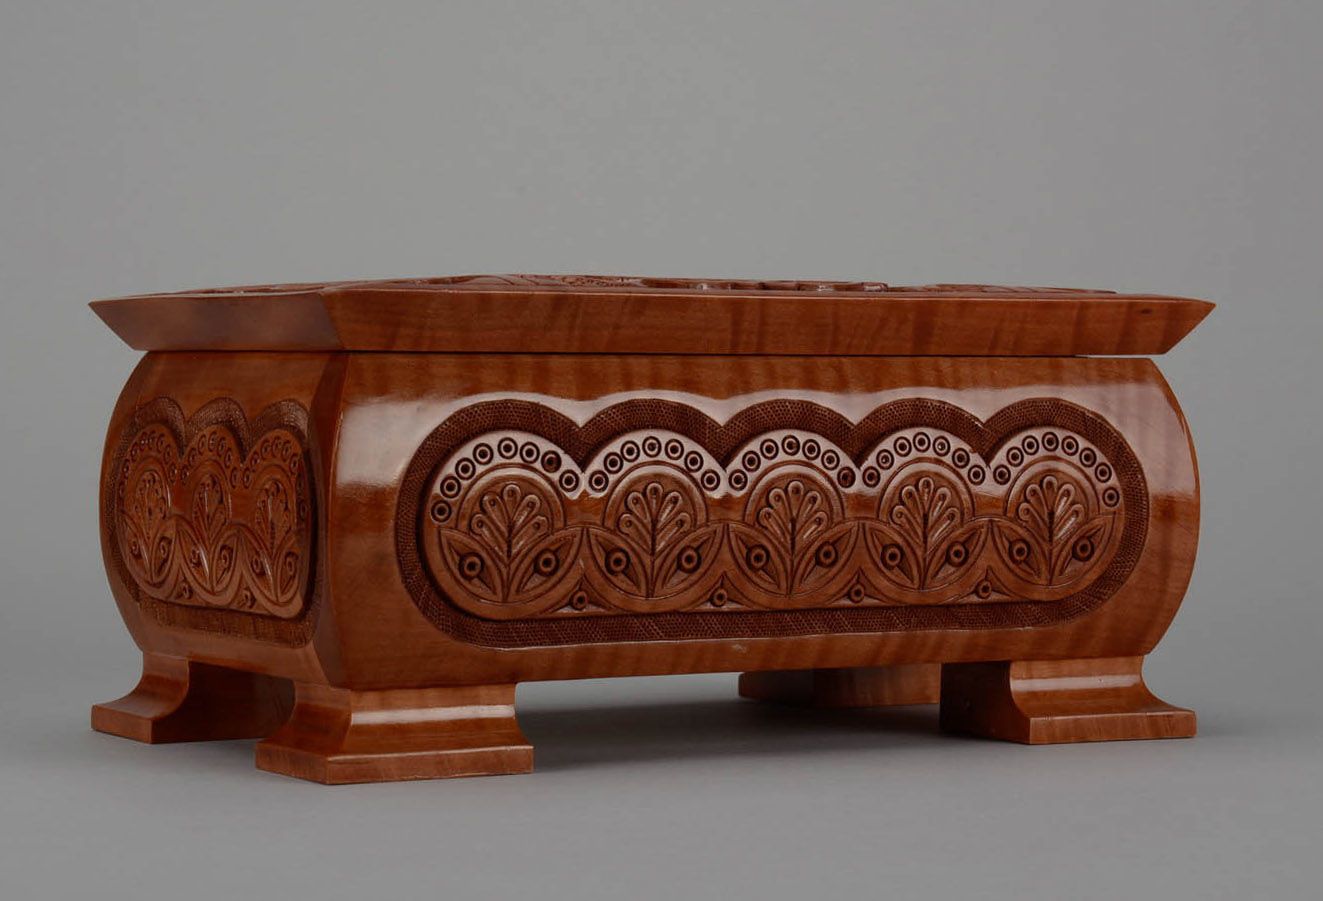 Carved wooden box photo 2